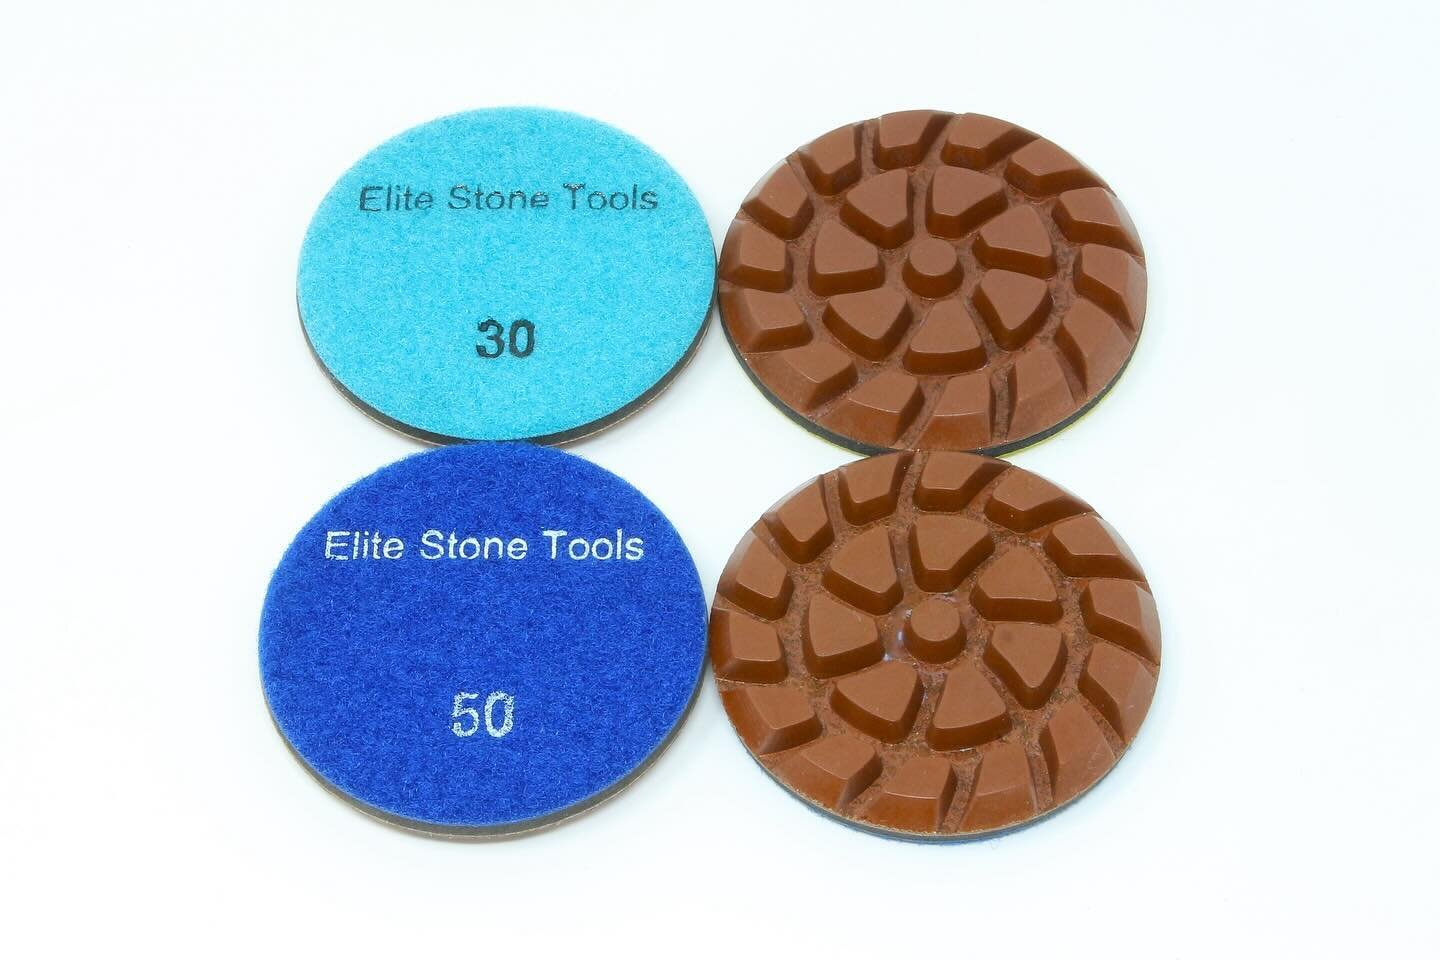 We are now stocking 75mm floor polishing pads. We have stock of copper bond and resin bond pads, please get in contact if there is anything that we do not stock that you are looking for. 

#granitecountertop #stonemasons #stonecarvings #madeofstone #